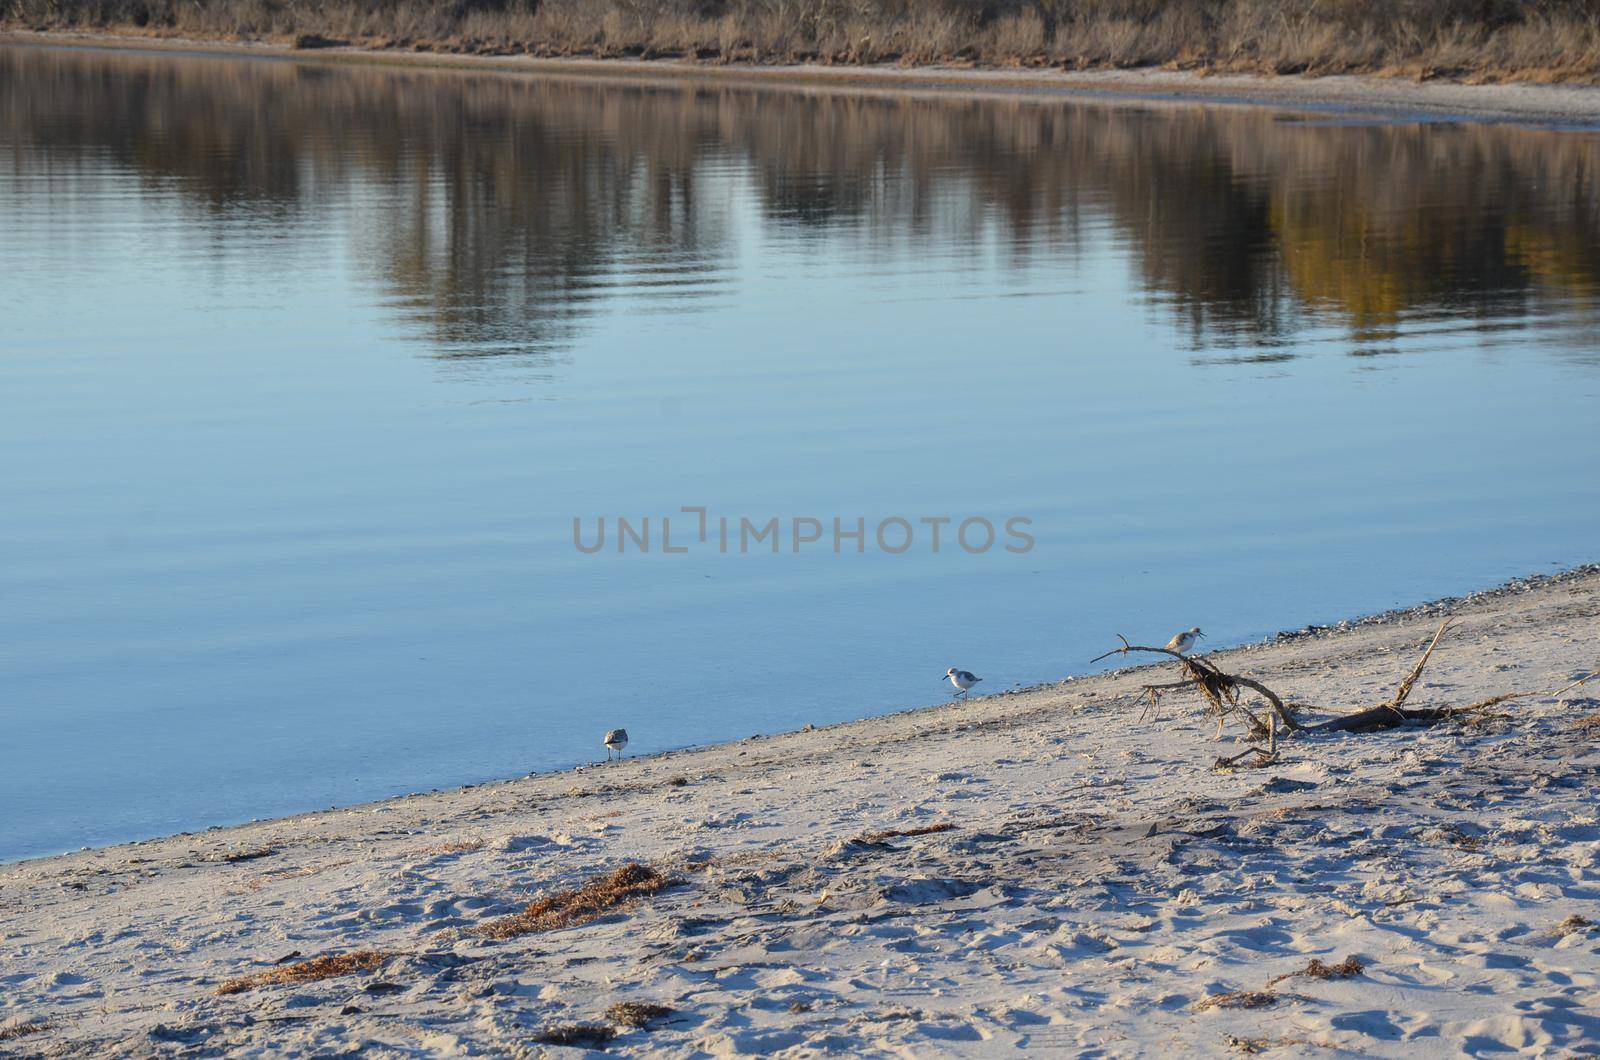 a lake or river with brown grasses and shore with sand and birds by stockphotofan1